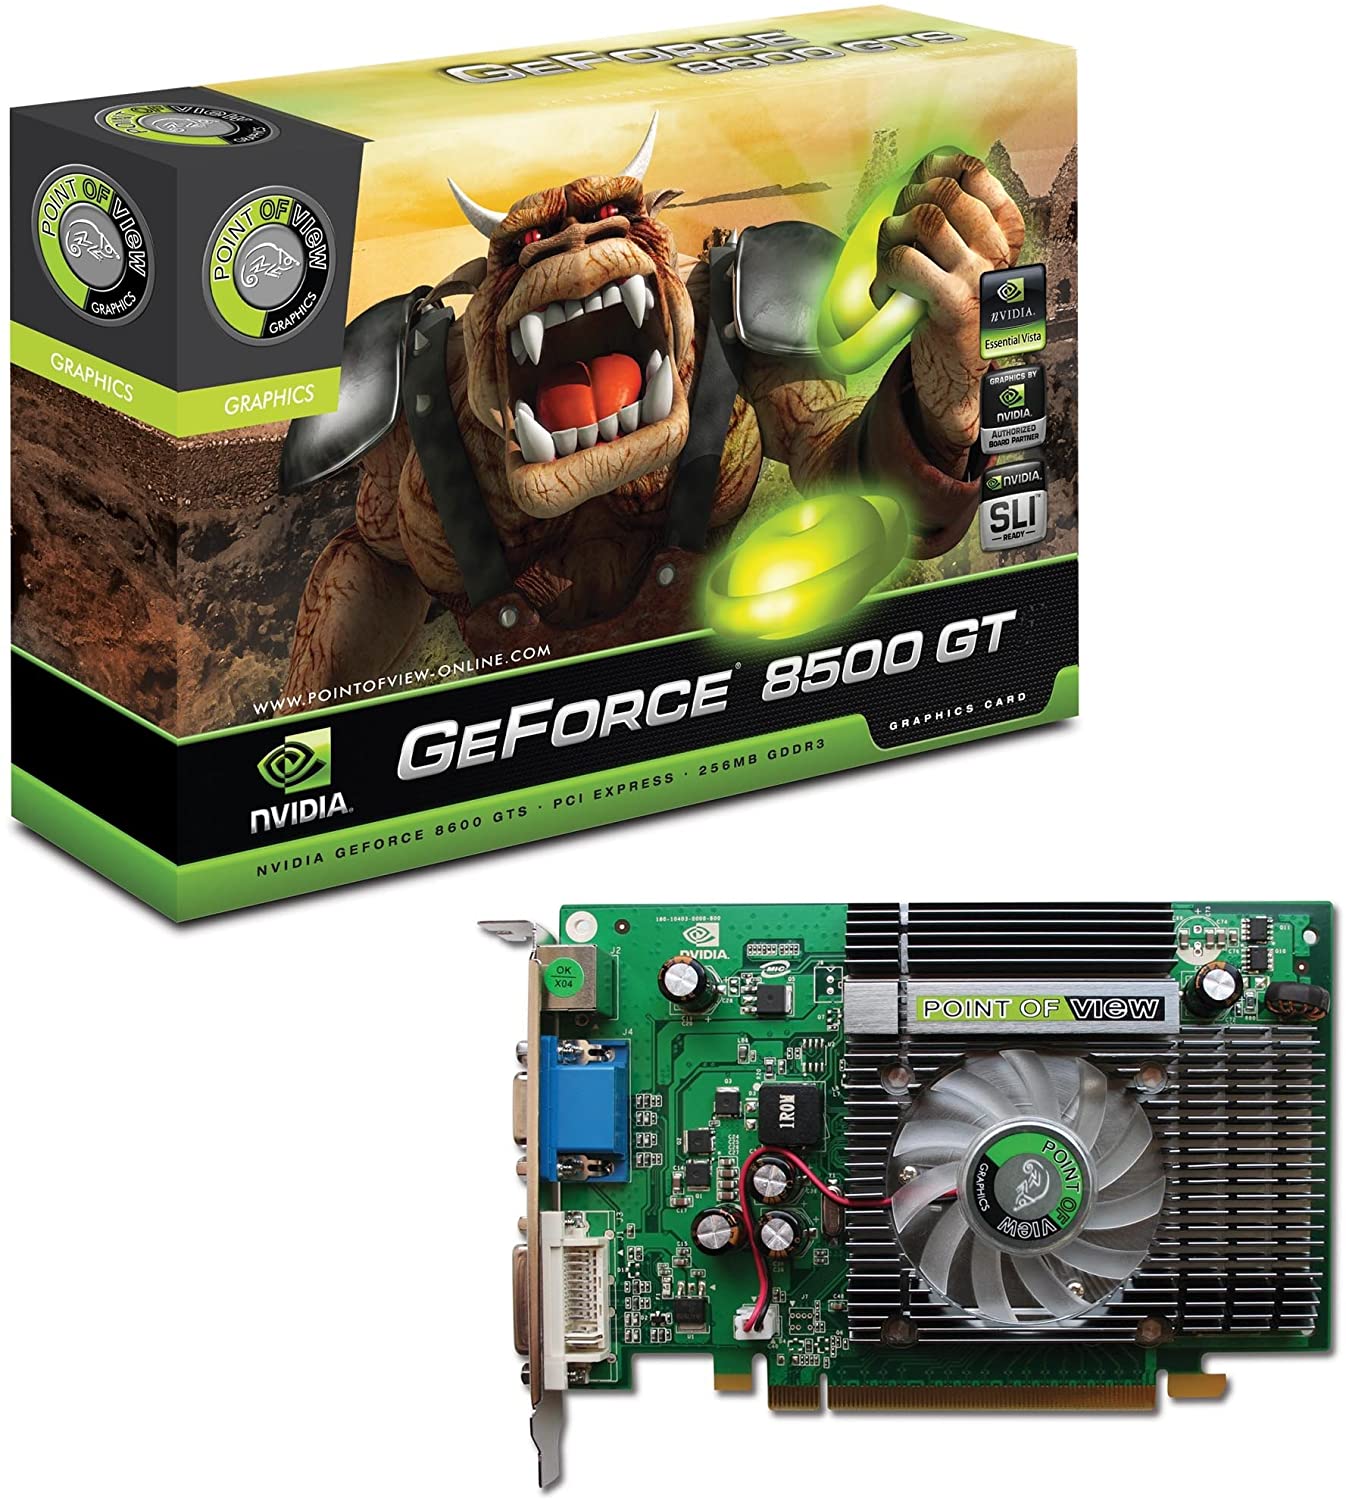 How to Overclock Nvidia Geforce 8500 GT Gaming